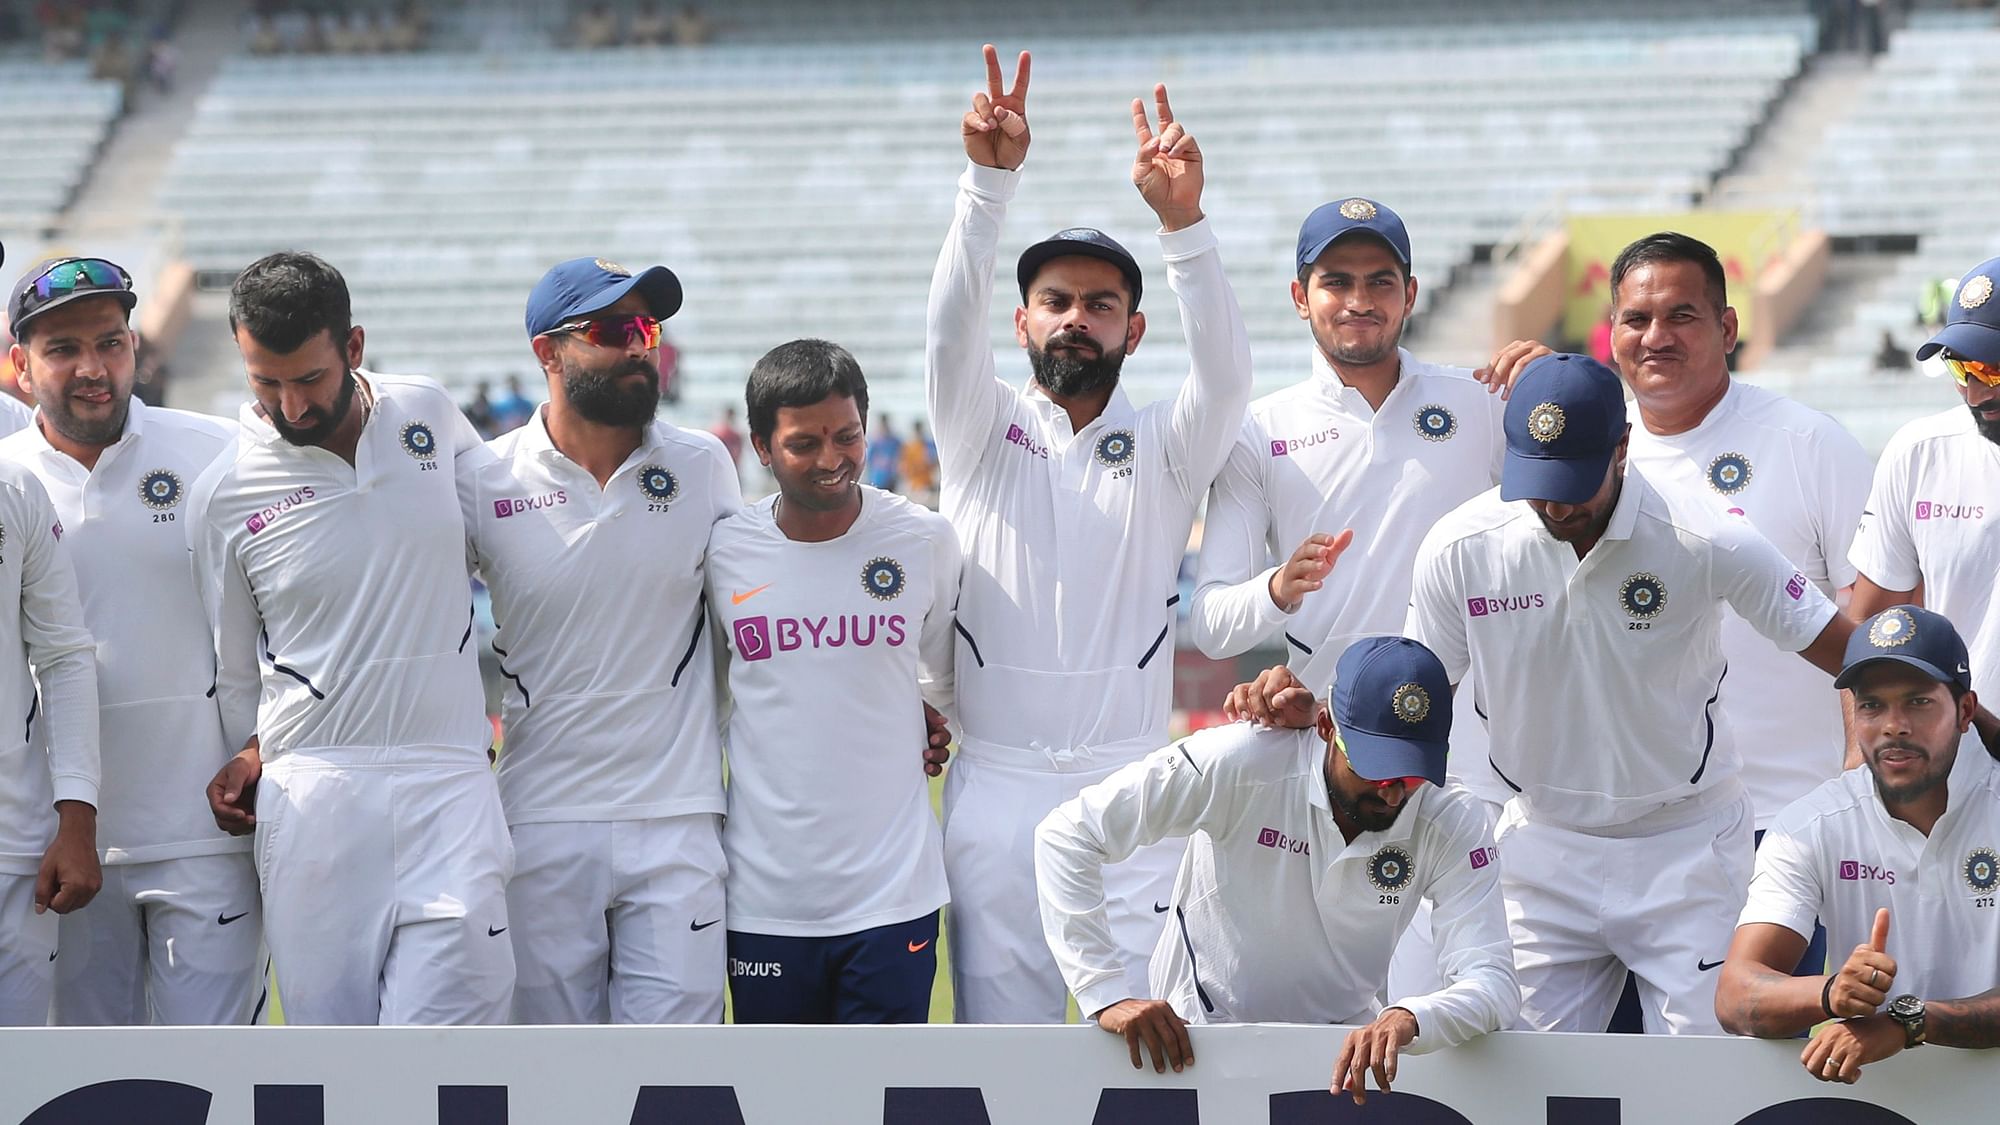 India completed a 3-0 whitewash of South Africa on Tuesday, ensuring they stay on top of the Test rankings.